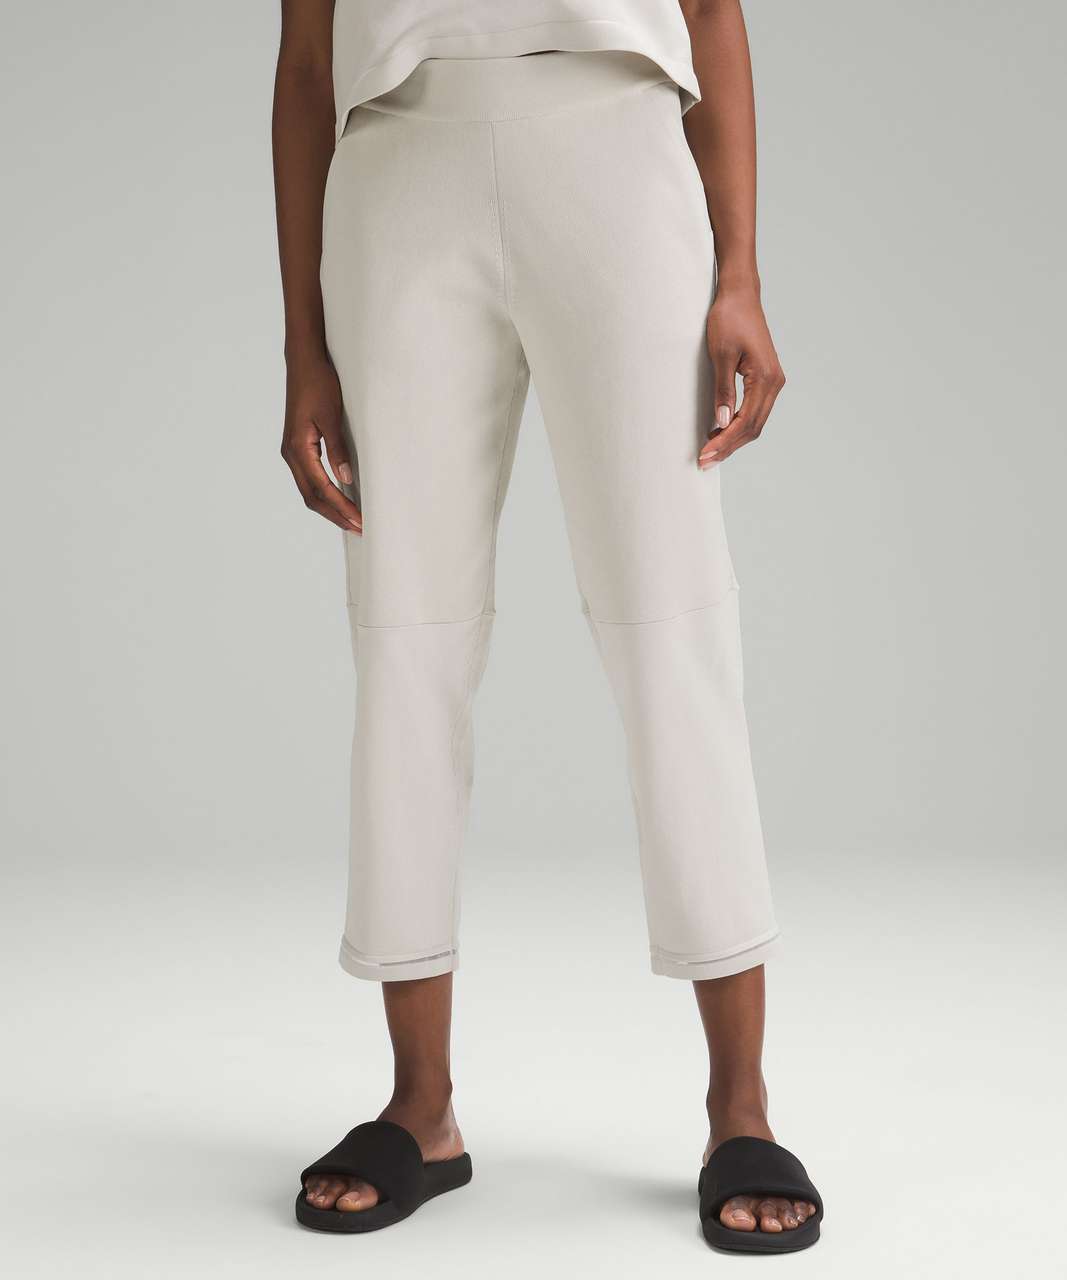 lululemon athletica Lightweight Cropped Pants for Women